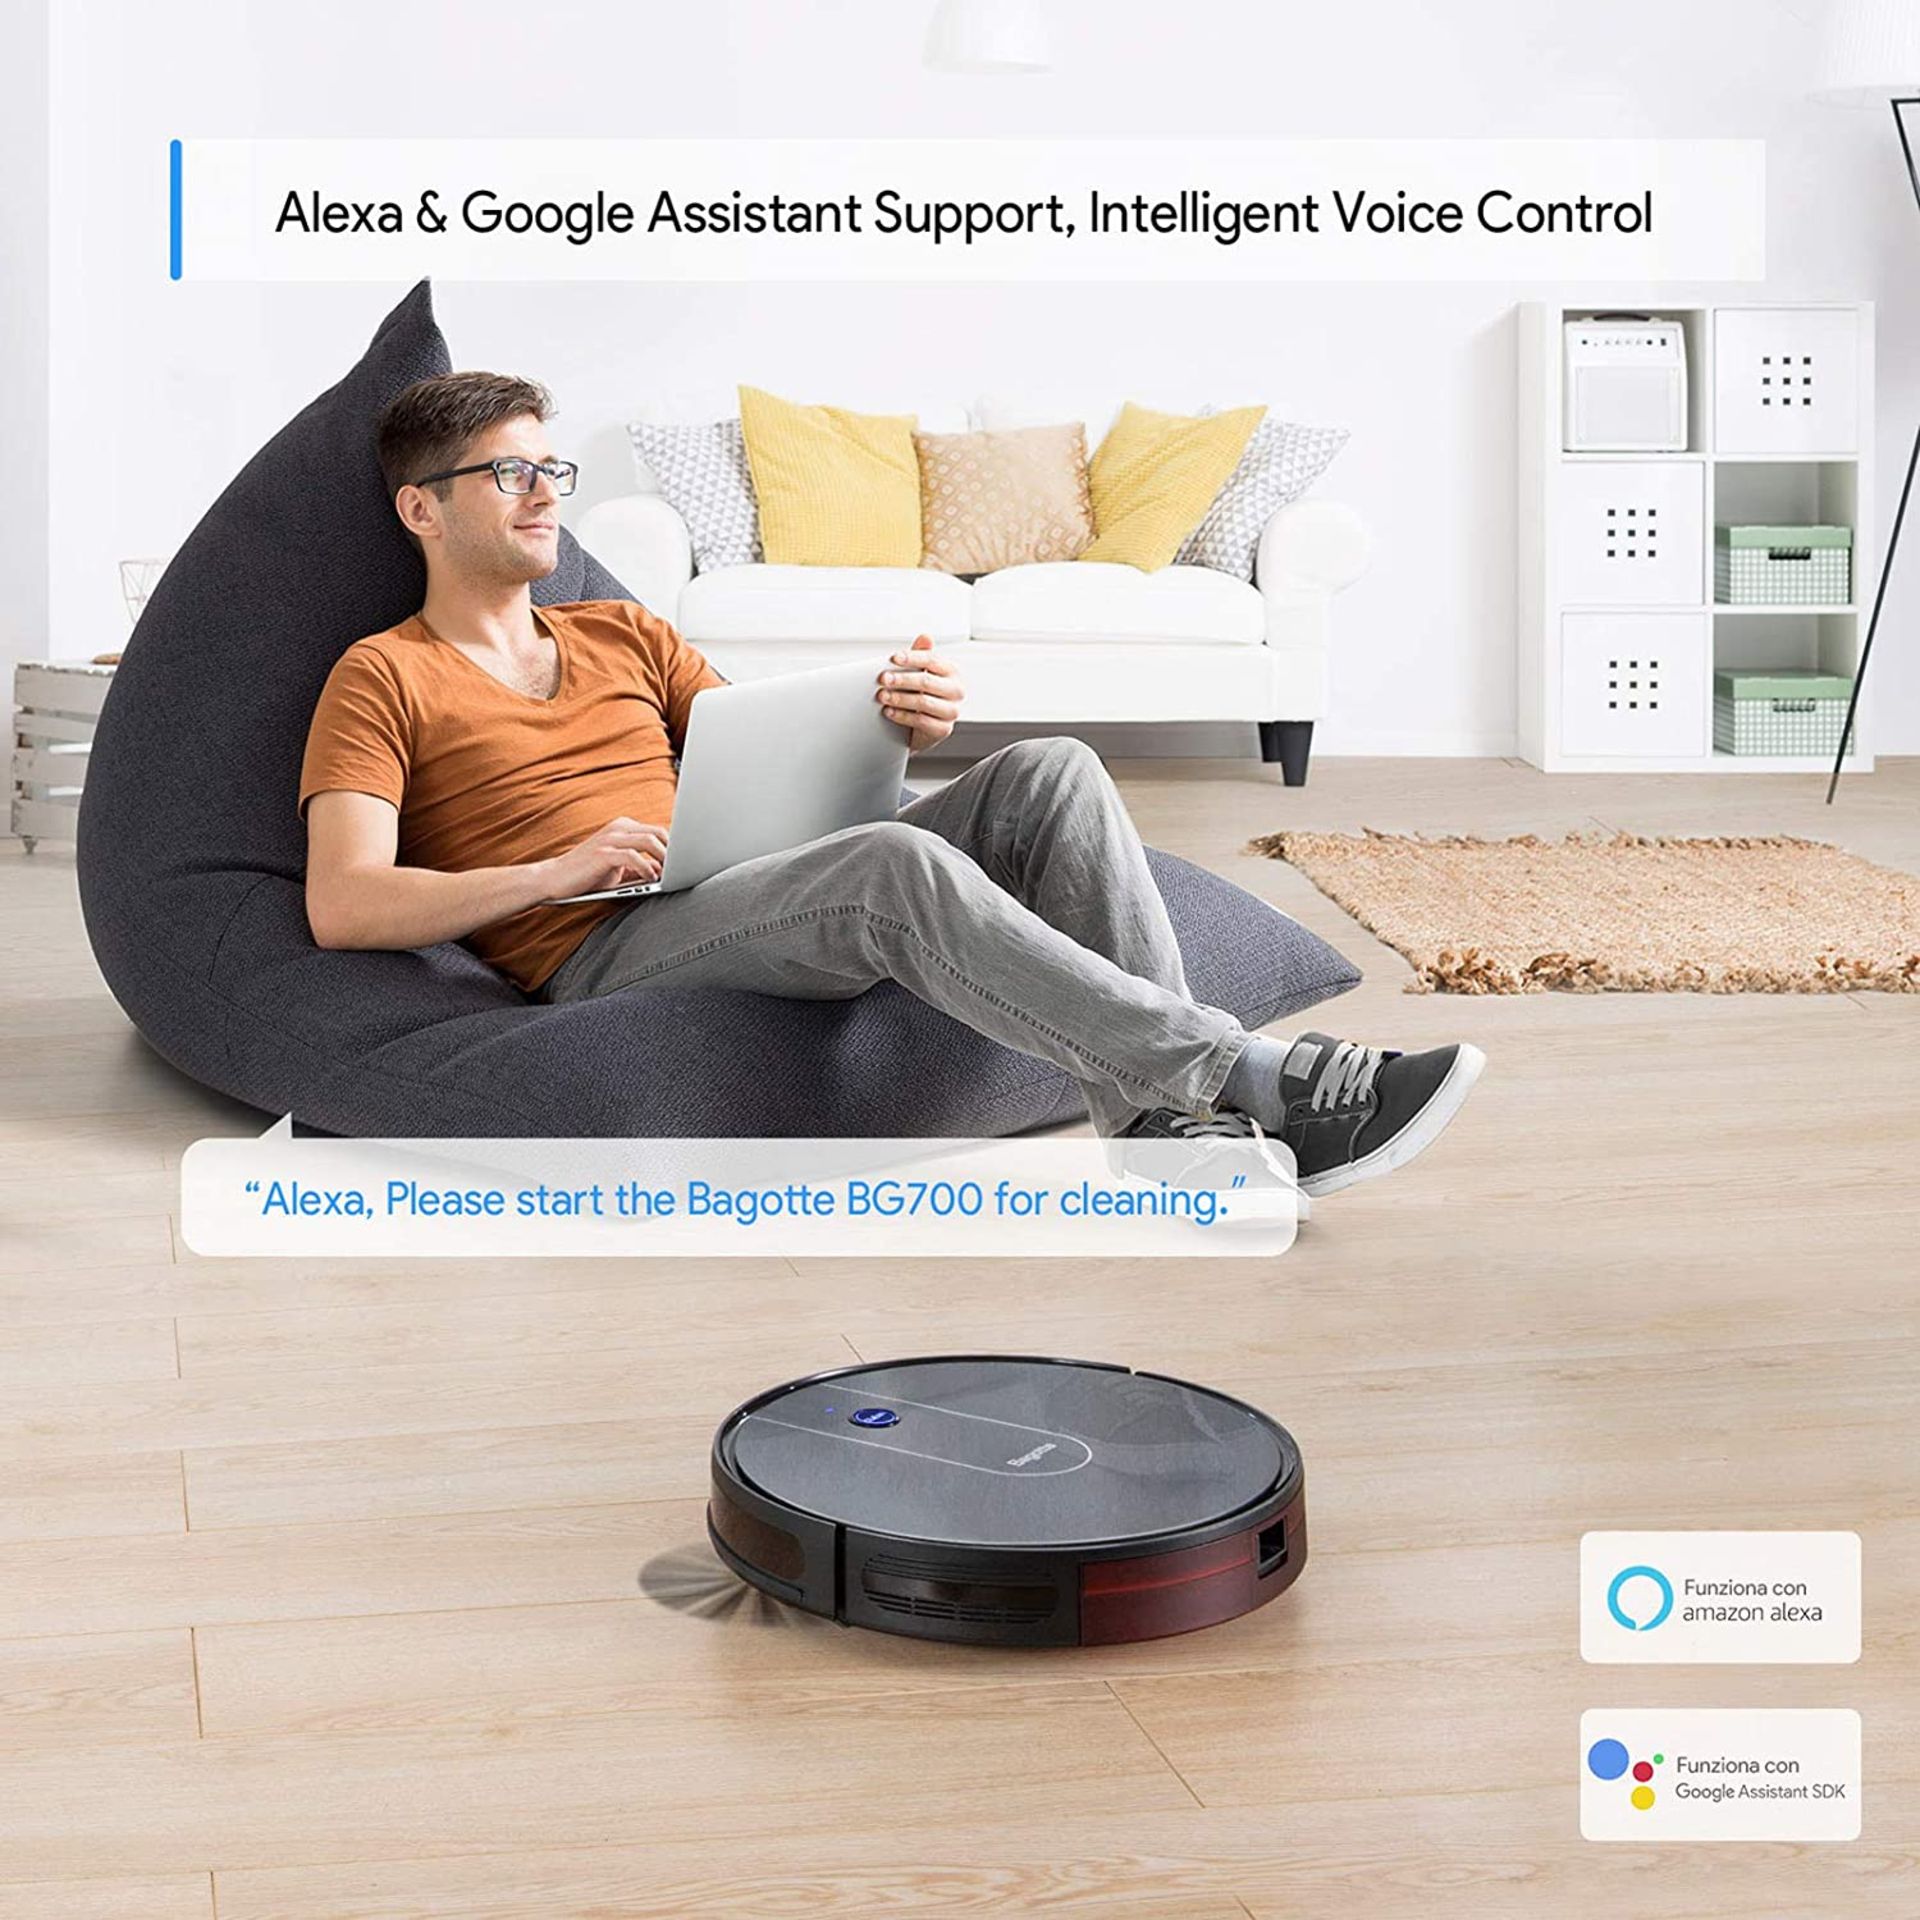 Bagotte BG700 Wi-Fi Robot Vacuum with mop - 2.7" Thin, Strong Suction, Work with Alexa - Image 7 of 8